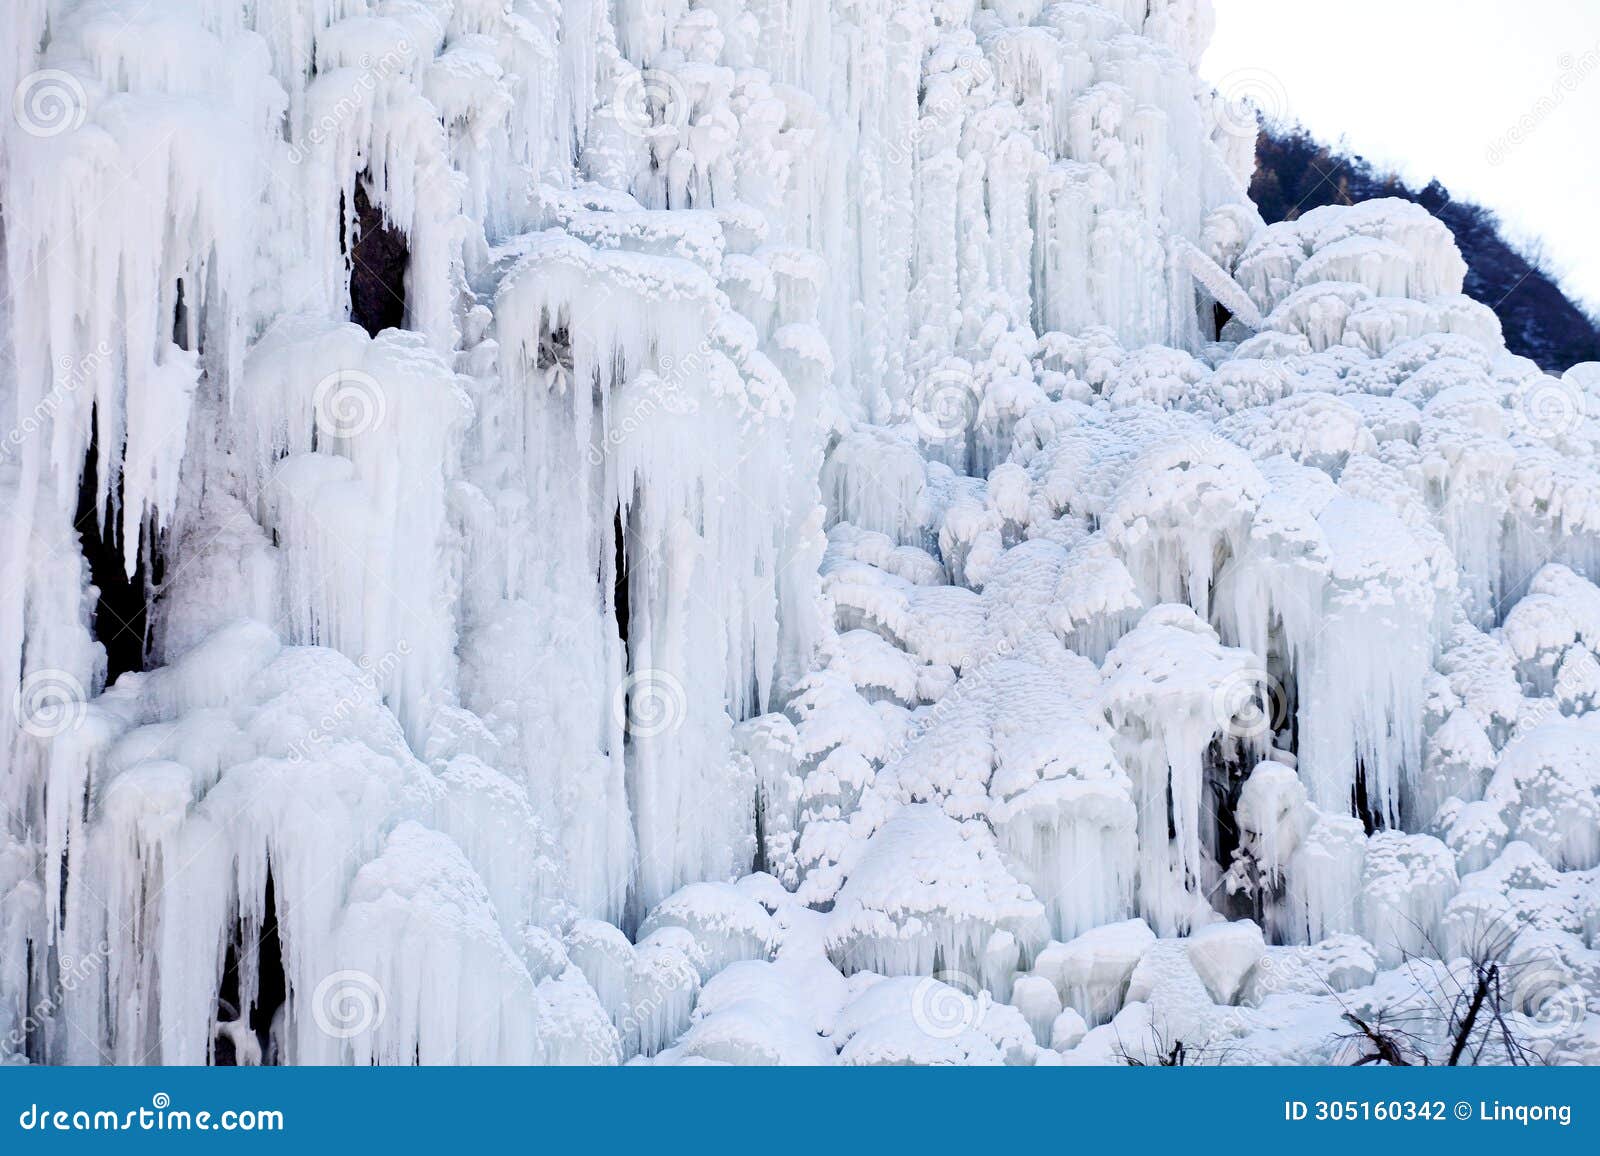 close-up shot of a spectacular icefall in the mountain area.